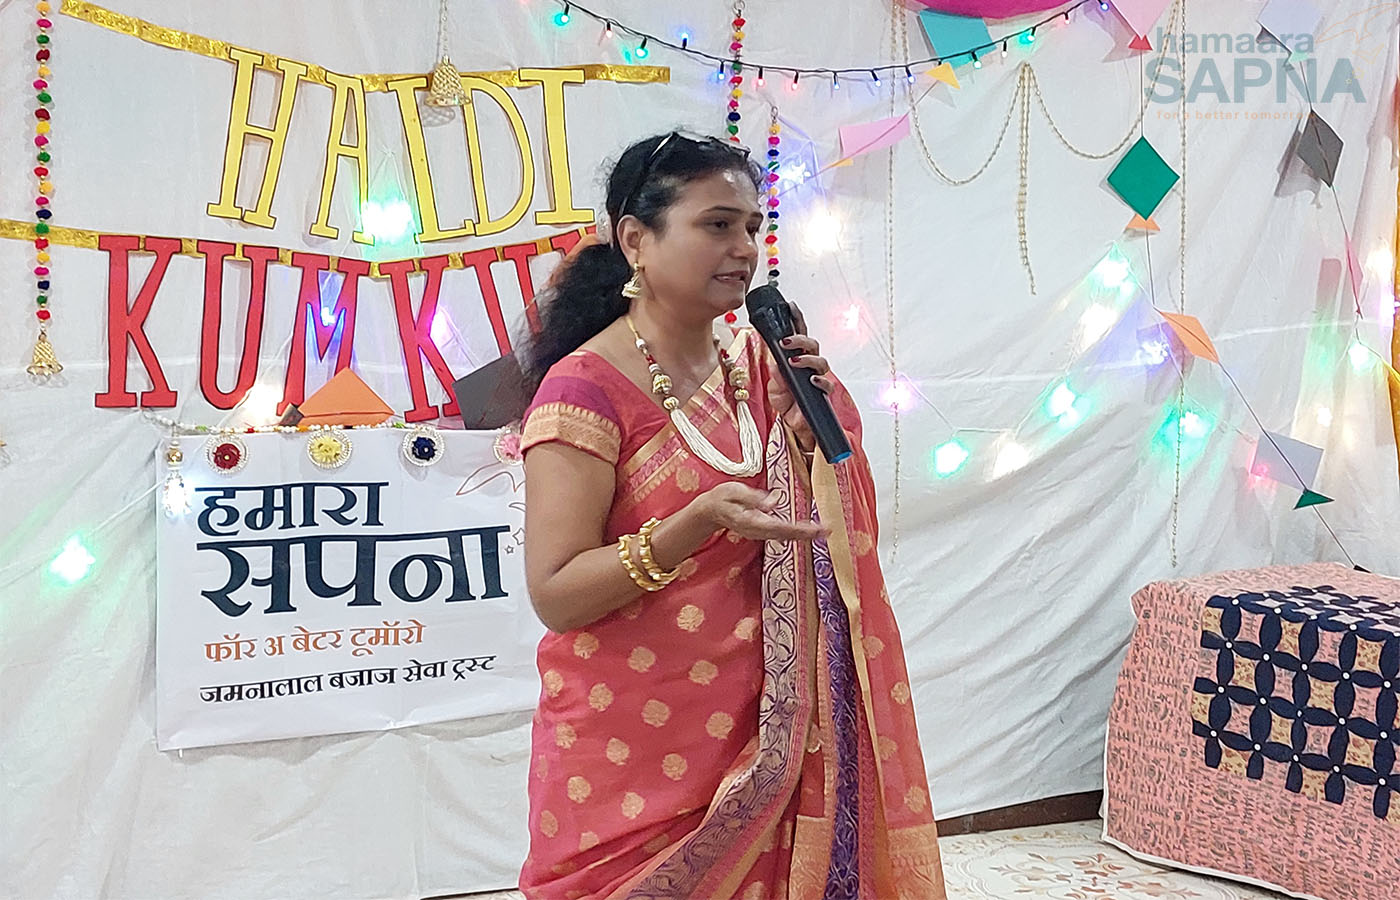 The Deputy Project Director welcomed everyone to the Haldi Kumkum ceremony also shared the information about the festival